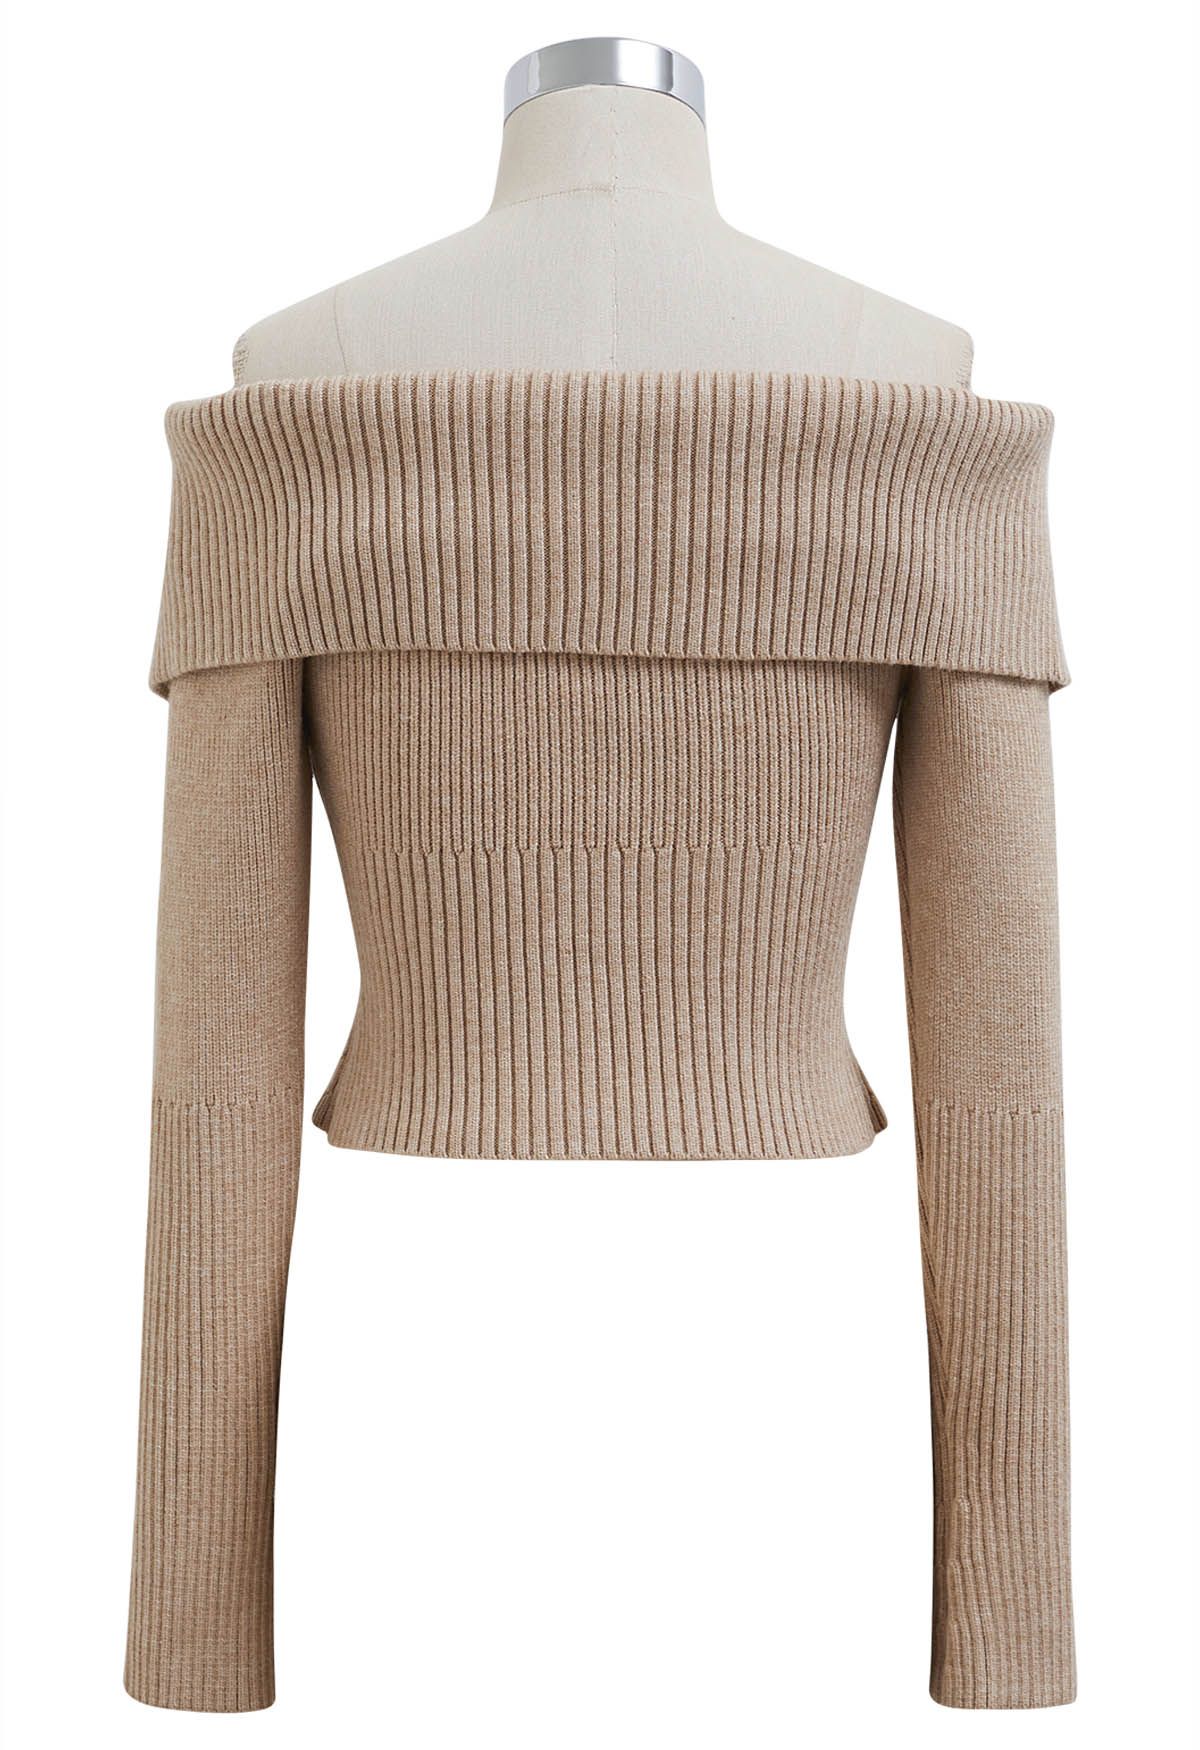 Flap Collar Zip Up Cropped Knit Top in Light Tan